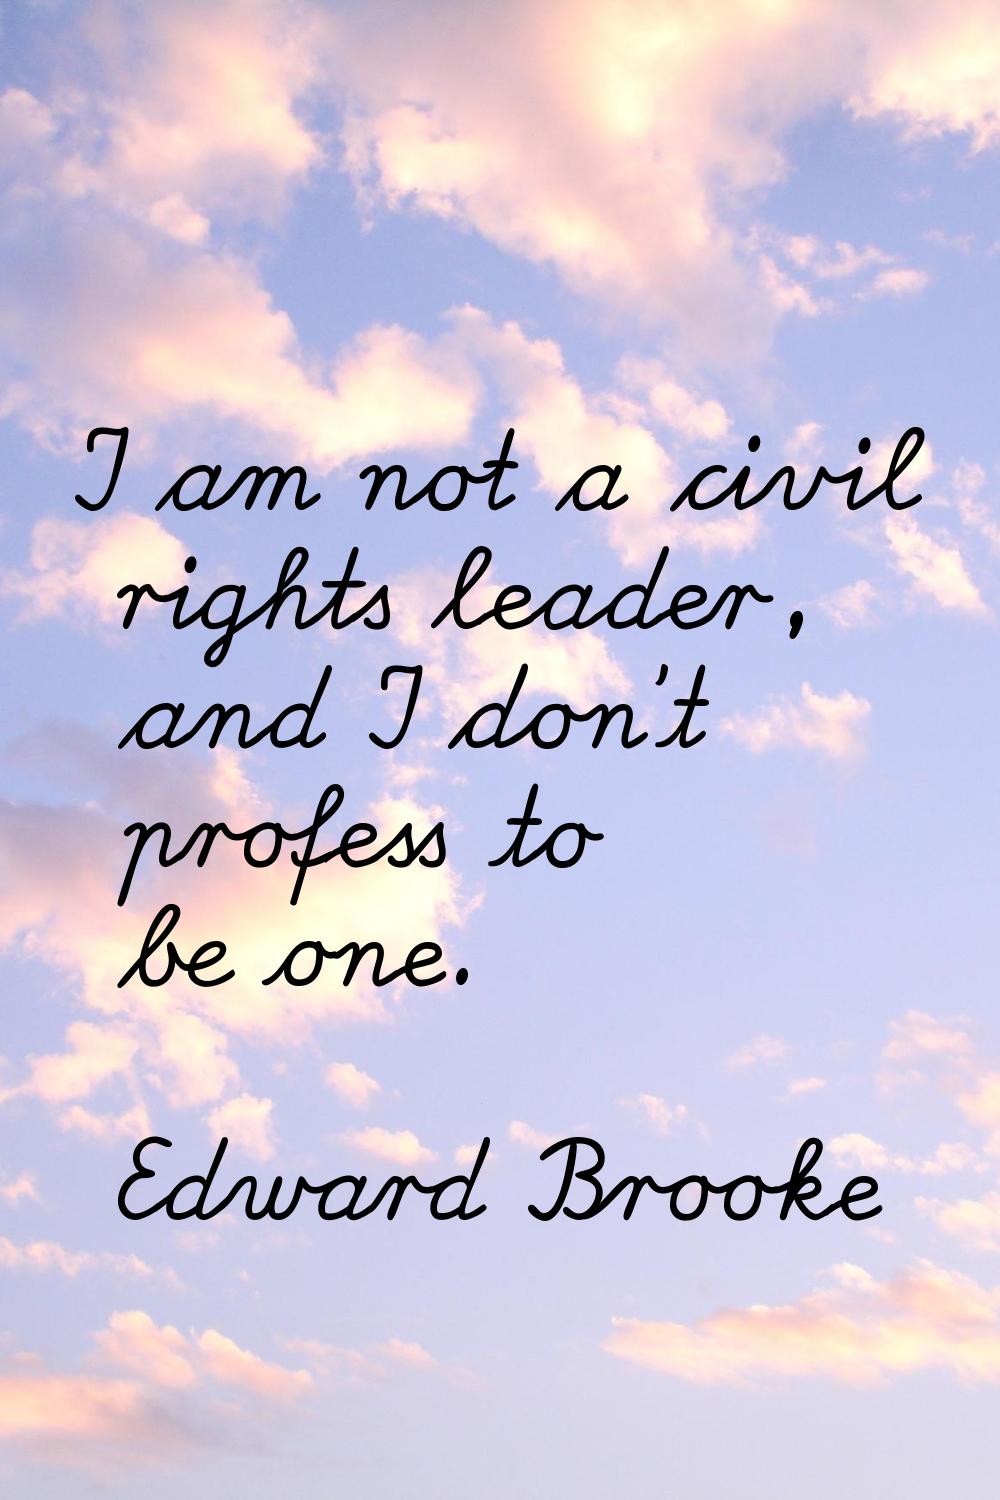 I am not a civil rights leader, and I don't profess to be one.